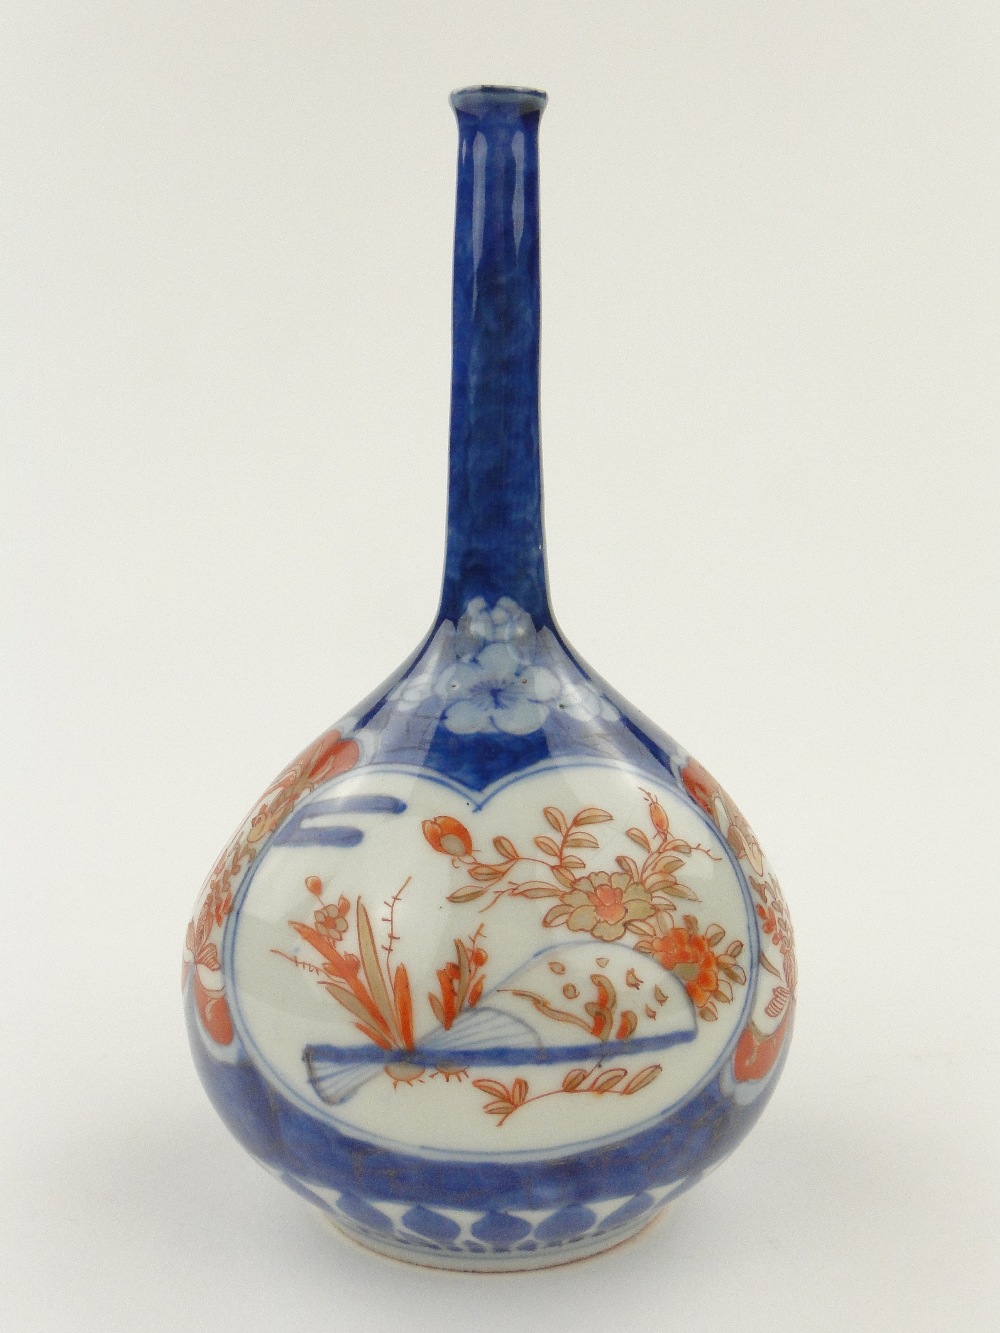 WITHDRAWN
A Japanese bottle vase with painted and gilded floral and bird design panels, 6.25".